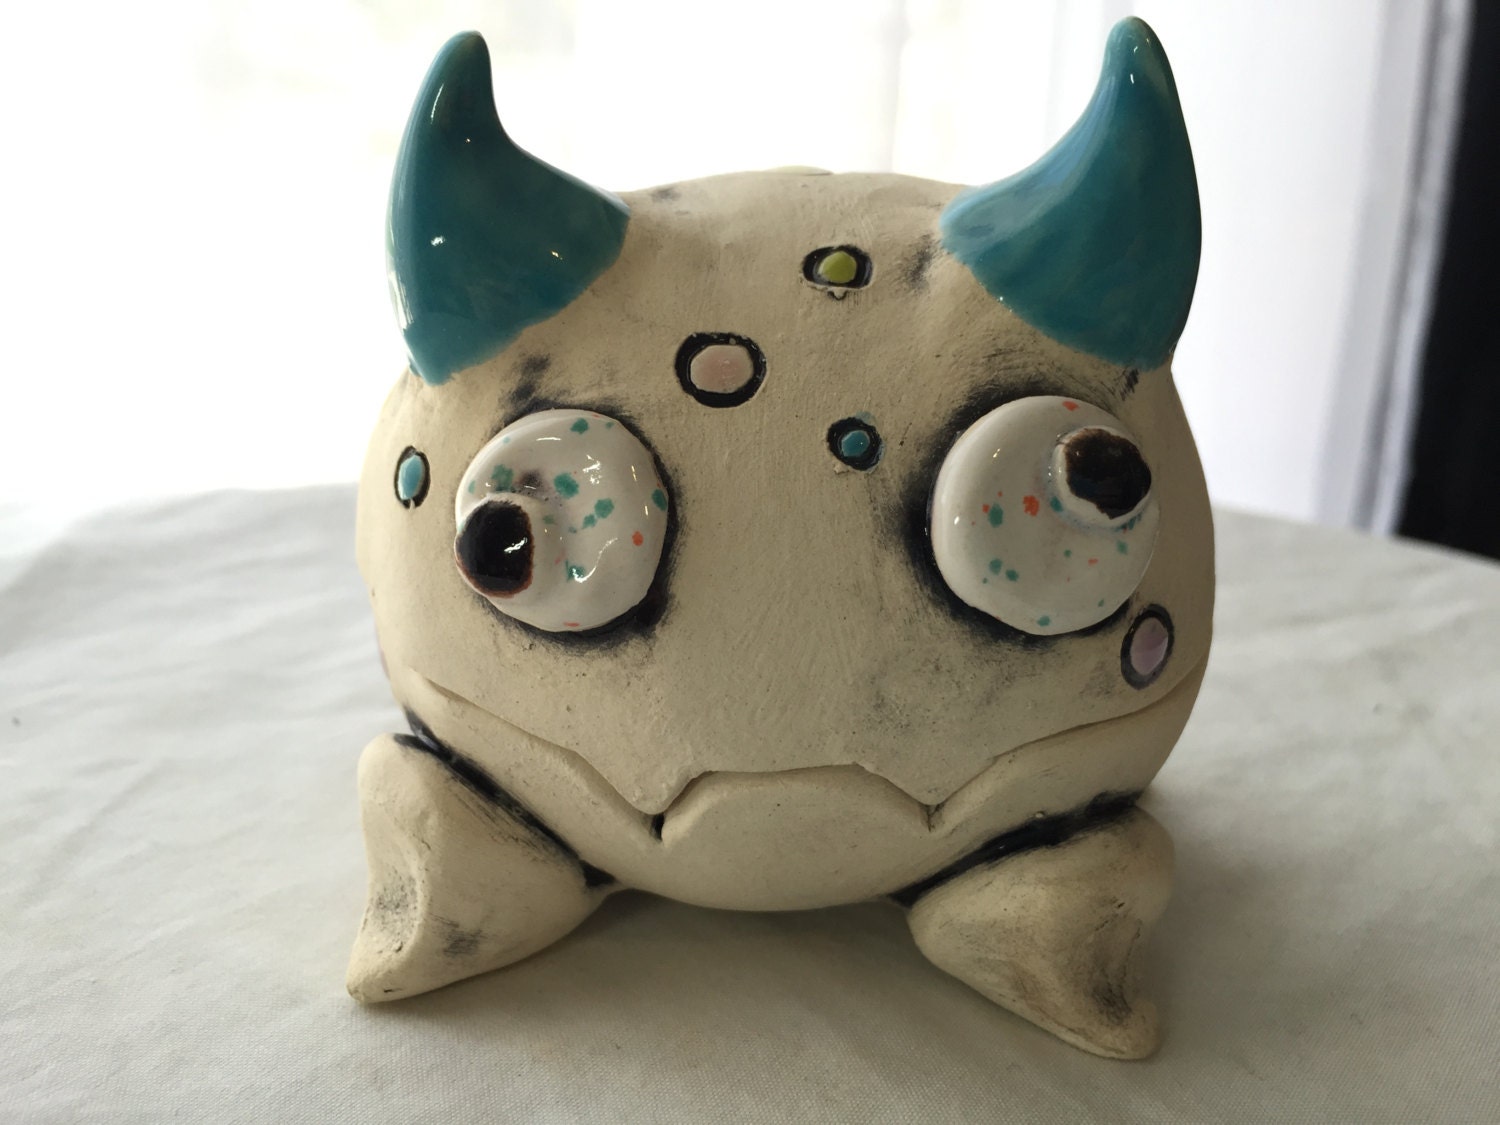 Googly eyed Spotted OddBall Monster by TheFenceCat on Etsy